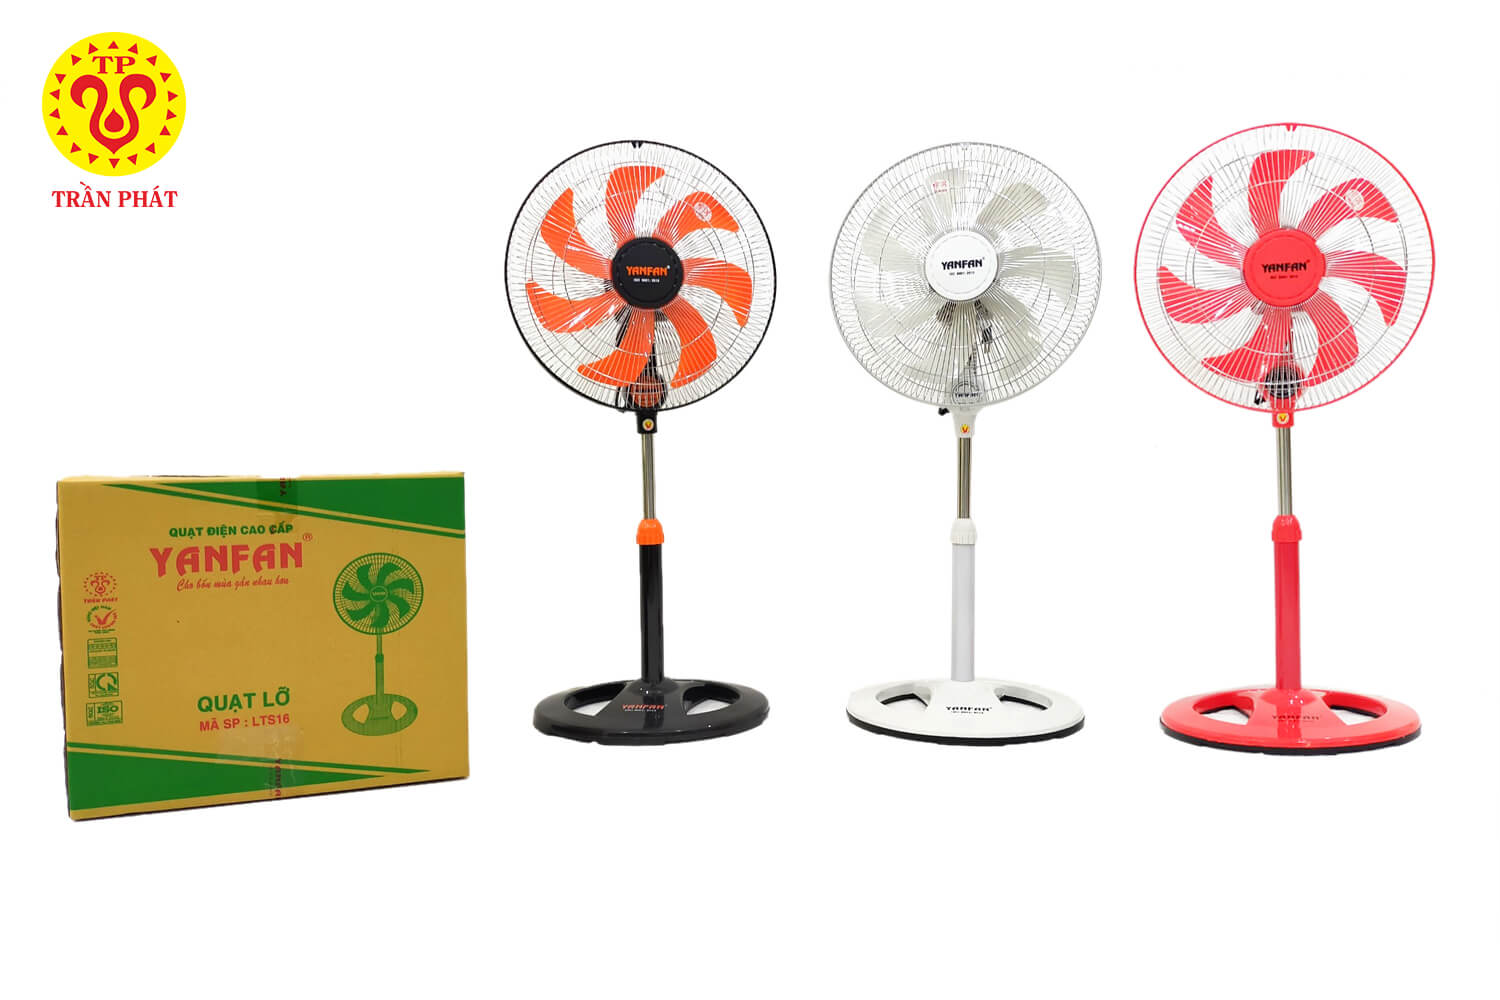 Many advantages are integrated in one fan